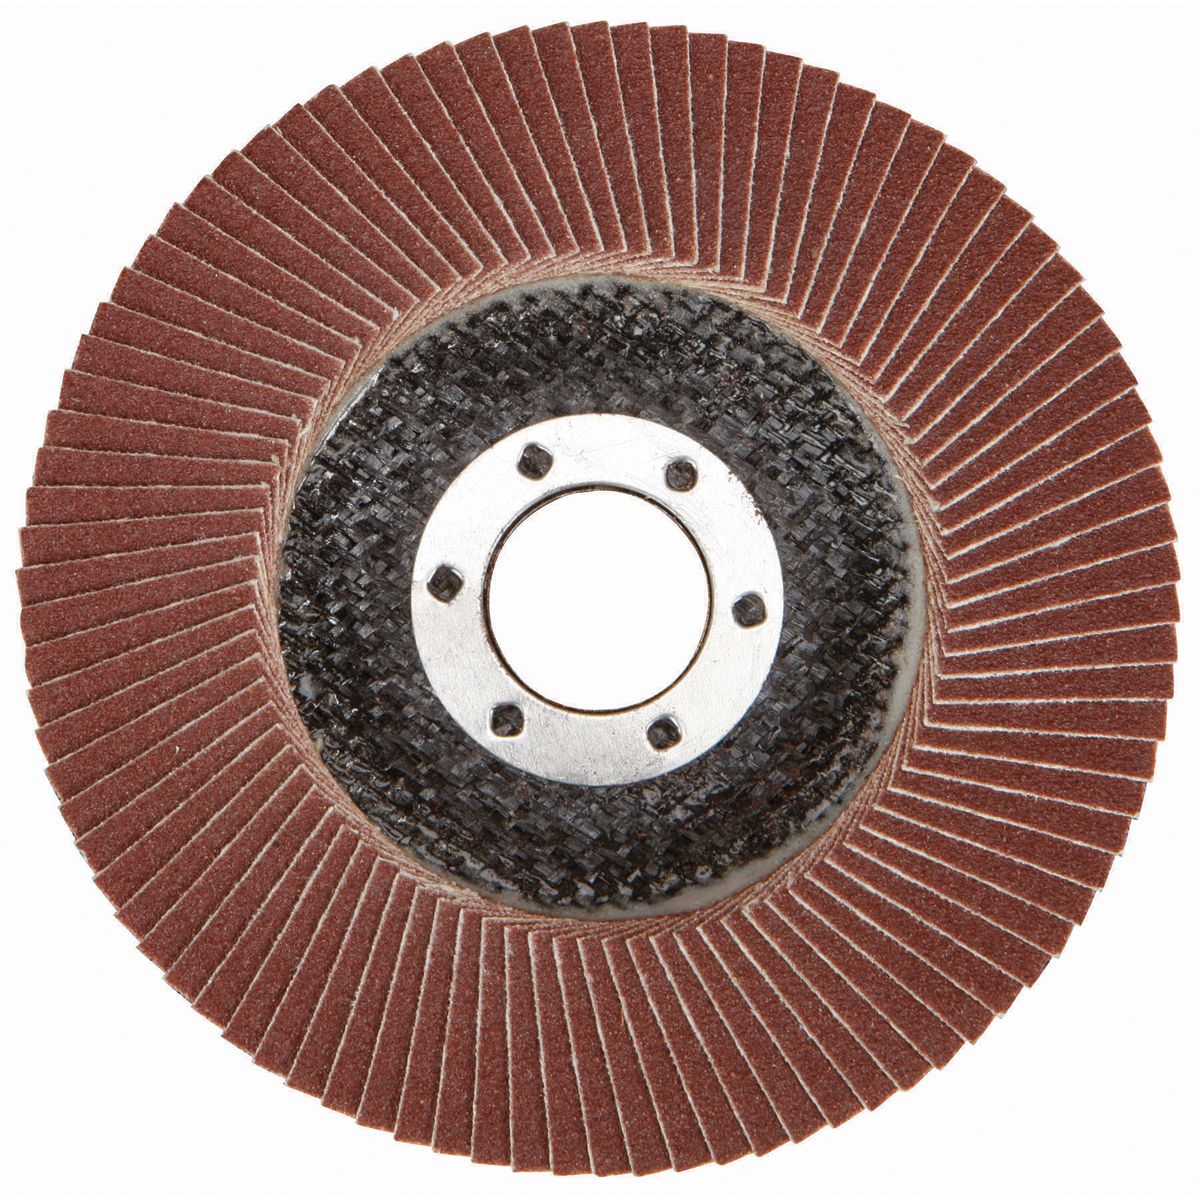 WARRIOR 4-1/2 in. x 7/8 in. 120-Grit Type 27 Flap Disc with Fiberglass Backing and Aluminum oxide Grain